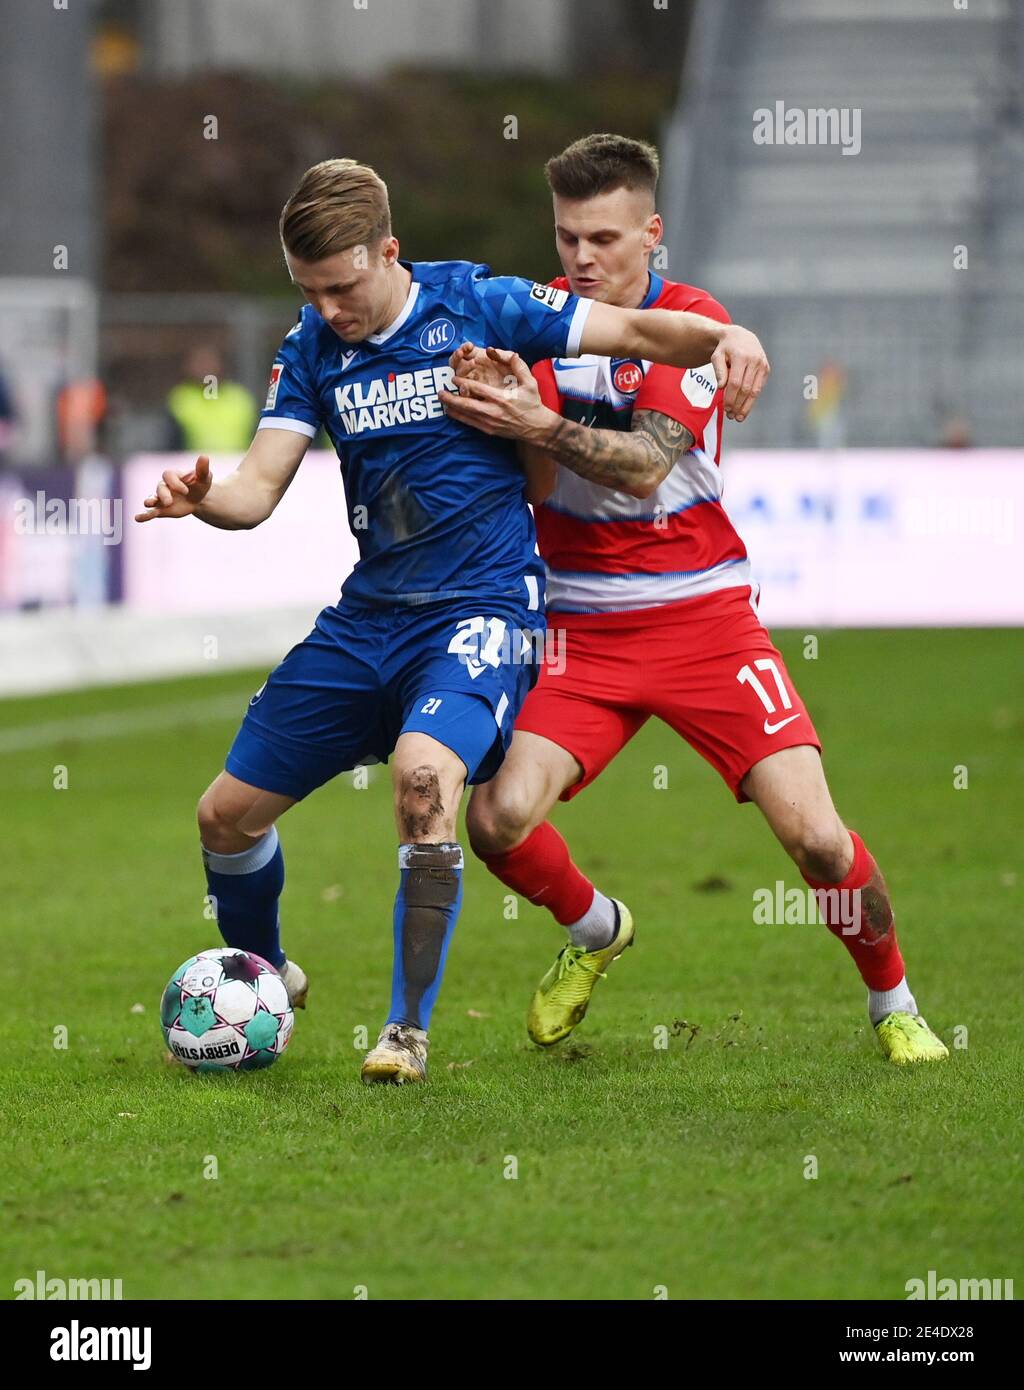 Karlsruhe, Germany. 23rd Jan, 2021. Football: 2. Bundesliga, Karlsruher SC - 1. FC Heidenheim, Matchday 17 at Wildparkstadion. Karlsruhe's Marco Thiede (l) and Heidenheim's Florian Pick fight for the ball. Credit: Uli Deck/dpa - IMPORTANT NOTE: In accordance with the regulations of the DFL Deutsche Fußball Liga and/or the DFB Deutscher Fußball-Bund, it is prohibited to use or have used photographs taken in the stadium and/or of the match in the form of sequence pictures and/or video-like photo series./dpa/Alamy Live News Stock Photo